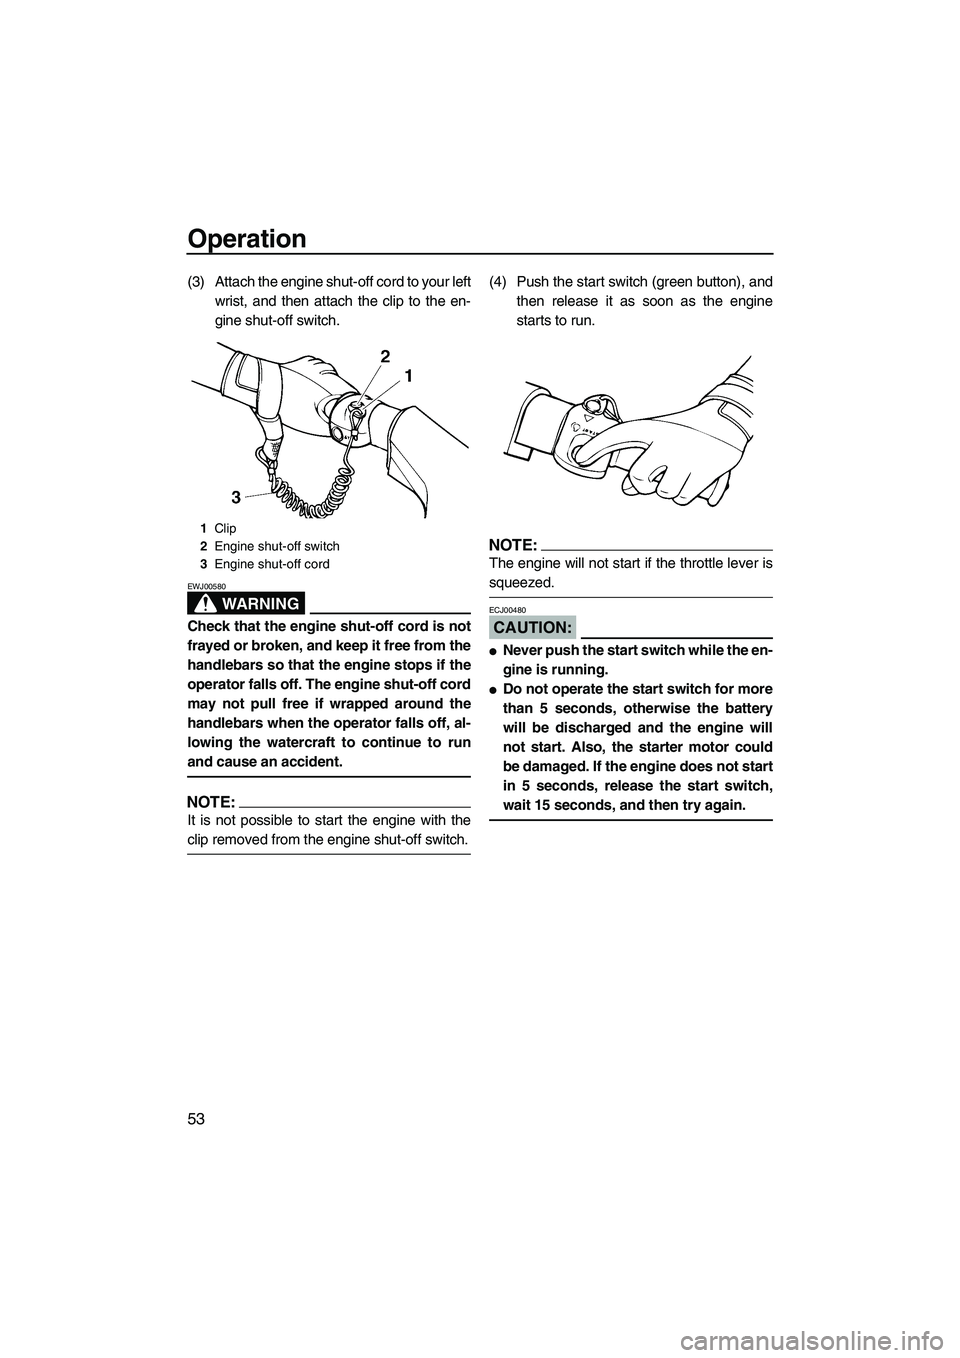 YAMAHA VX CRUISER 2007  Owners Manual Operation
53
(3) Attach the engine shut-off cord to your left
wrist, and then attach the clip to the en-
gine shut-off switch.
WARNING
EWJ00580
Check that the engine shut-off cord is not
frayed or bro